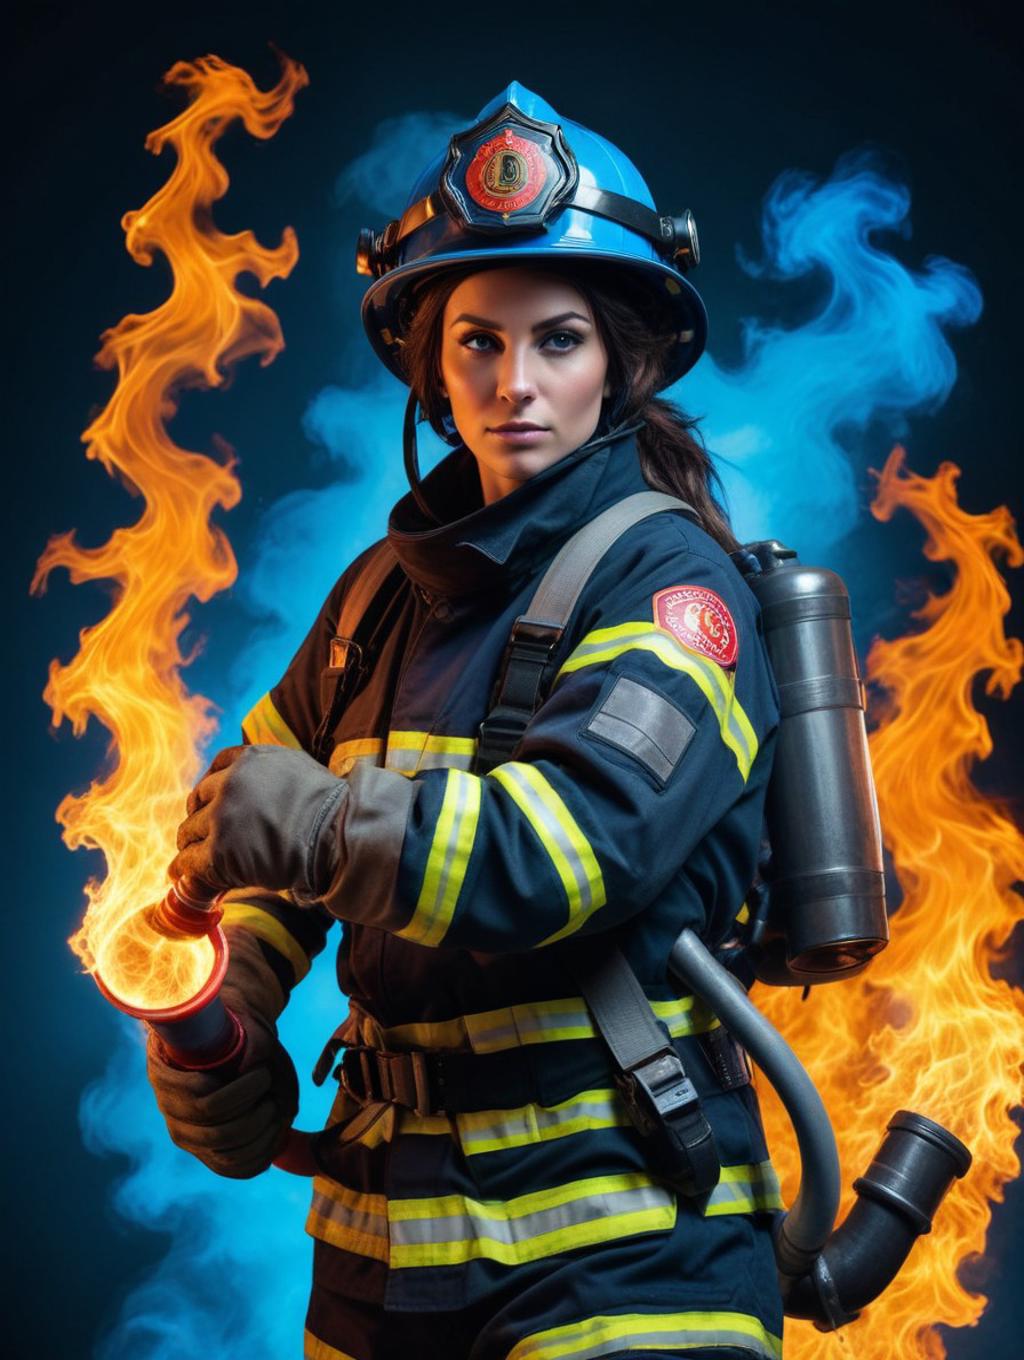 Fire Fighters Women: Portrait Photography & Wall Frames-Theme:3